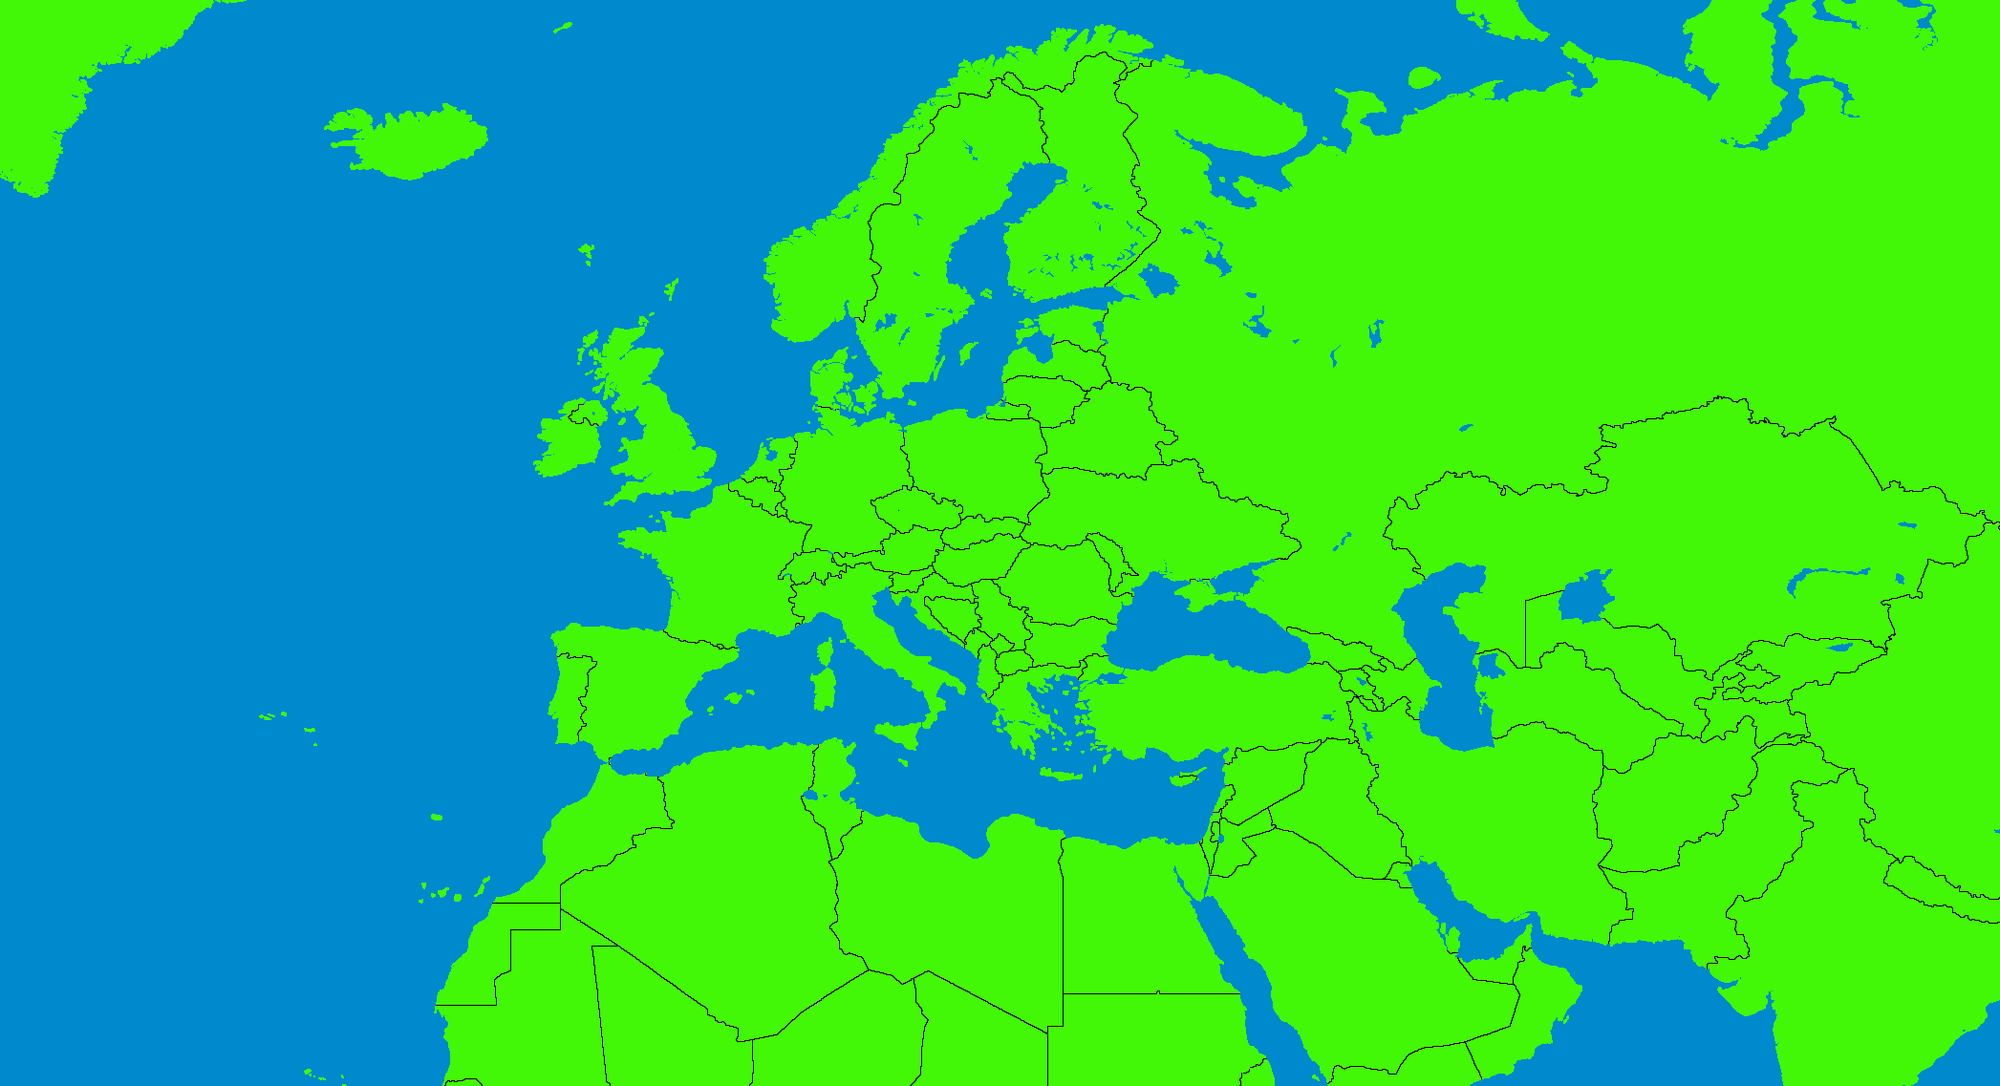 image-map-of-europe-no-names-png-thefutureofeuropes-wiki